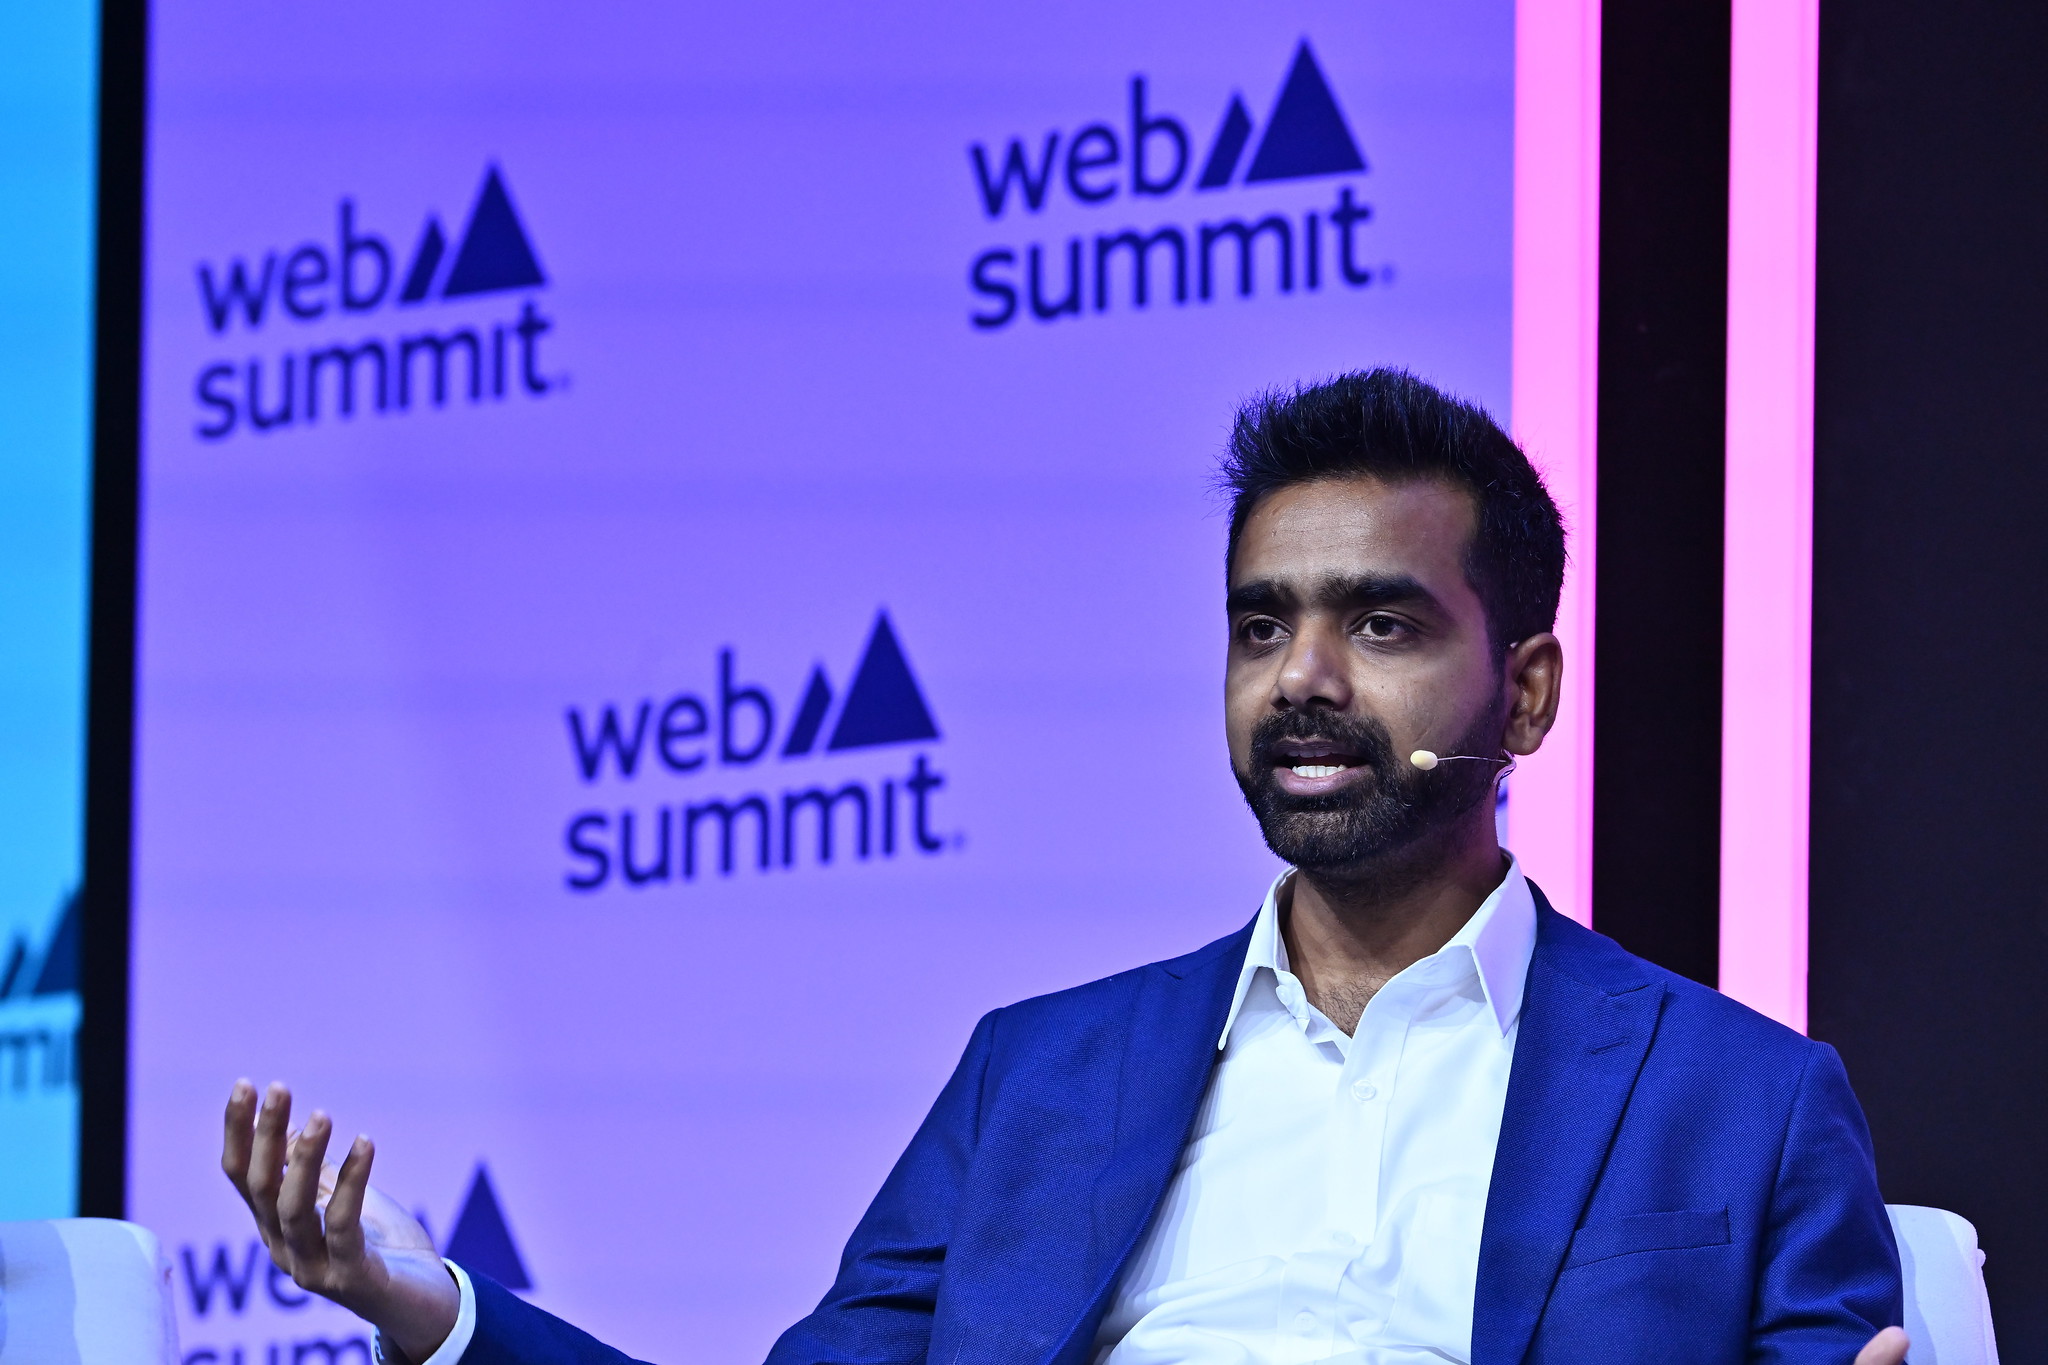 Himanshu Gupta, CEO ClimateAi | Ex Office of Al Gore, on AI Academy Stage during day one of Web Summit 2023 at the Altice Arena in Lisbon, Portugal